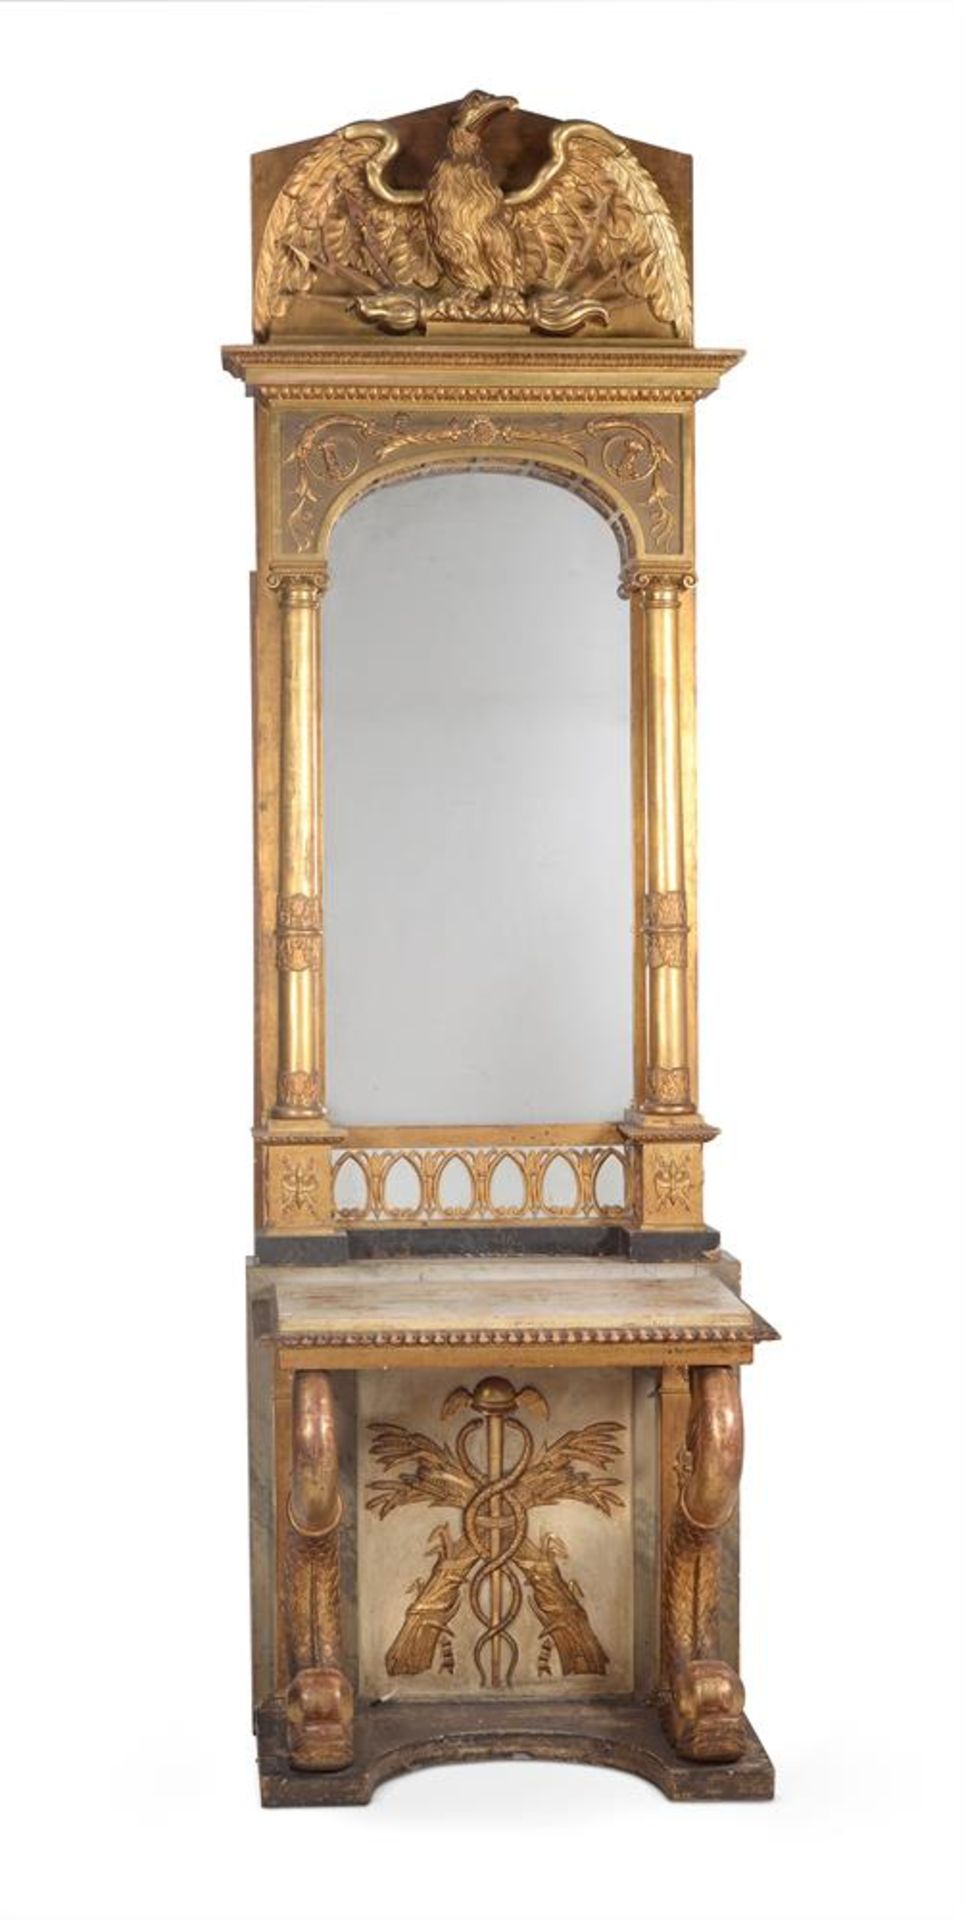 A SWEDISH GILTWOOD AND SIMULATED MARBLE PIER MIRROR AND CONSOLE TABLE, SECOND QUARTER 19TH CENTURY